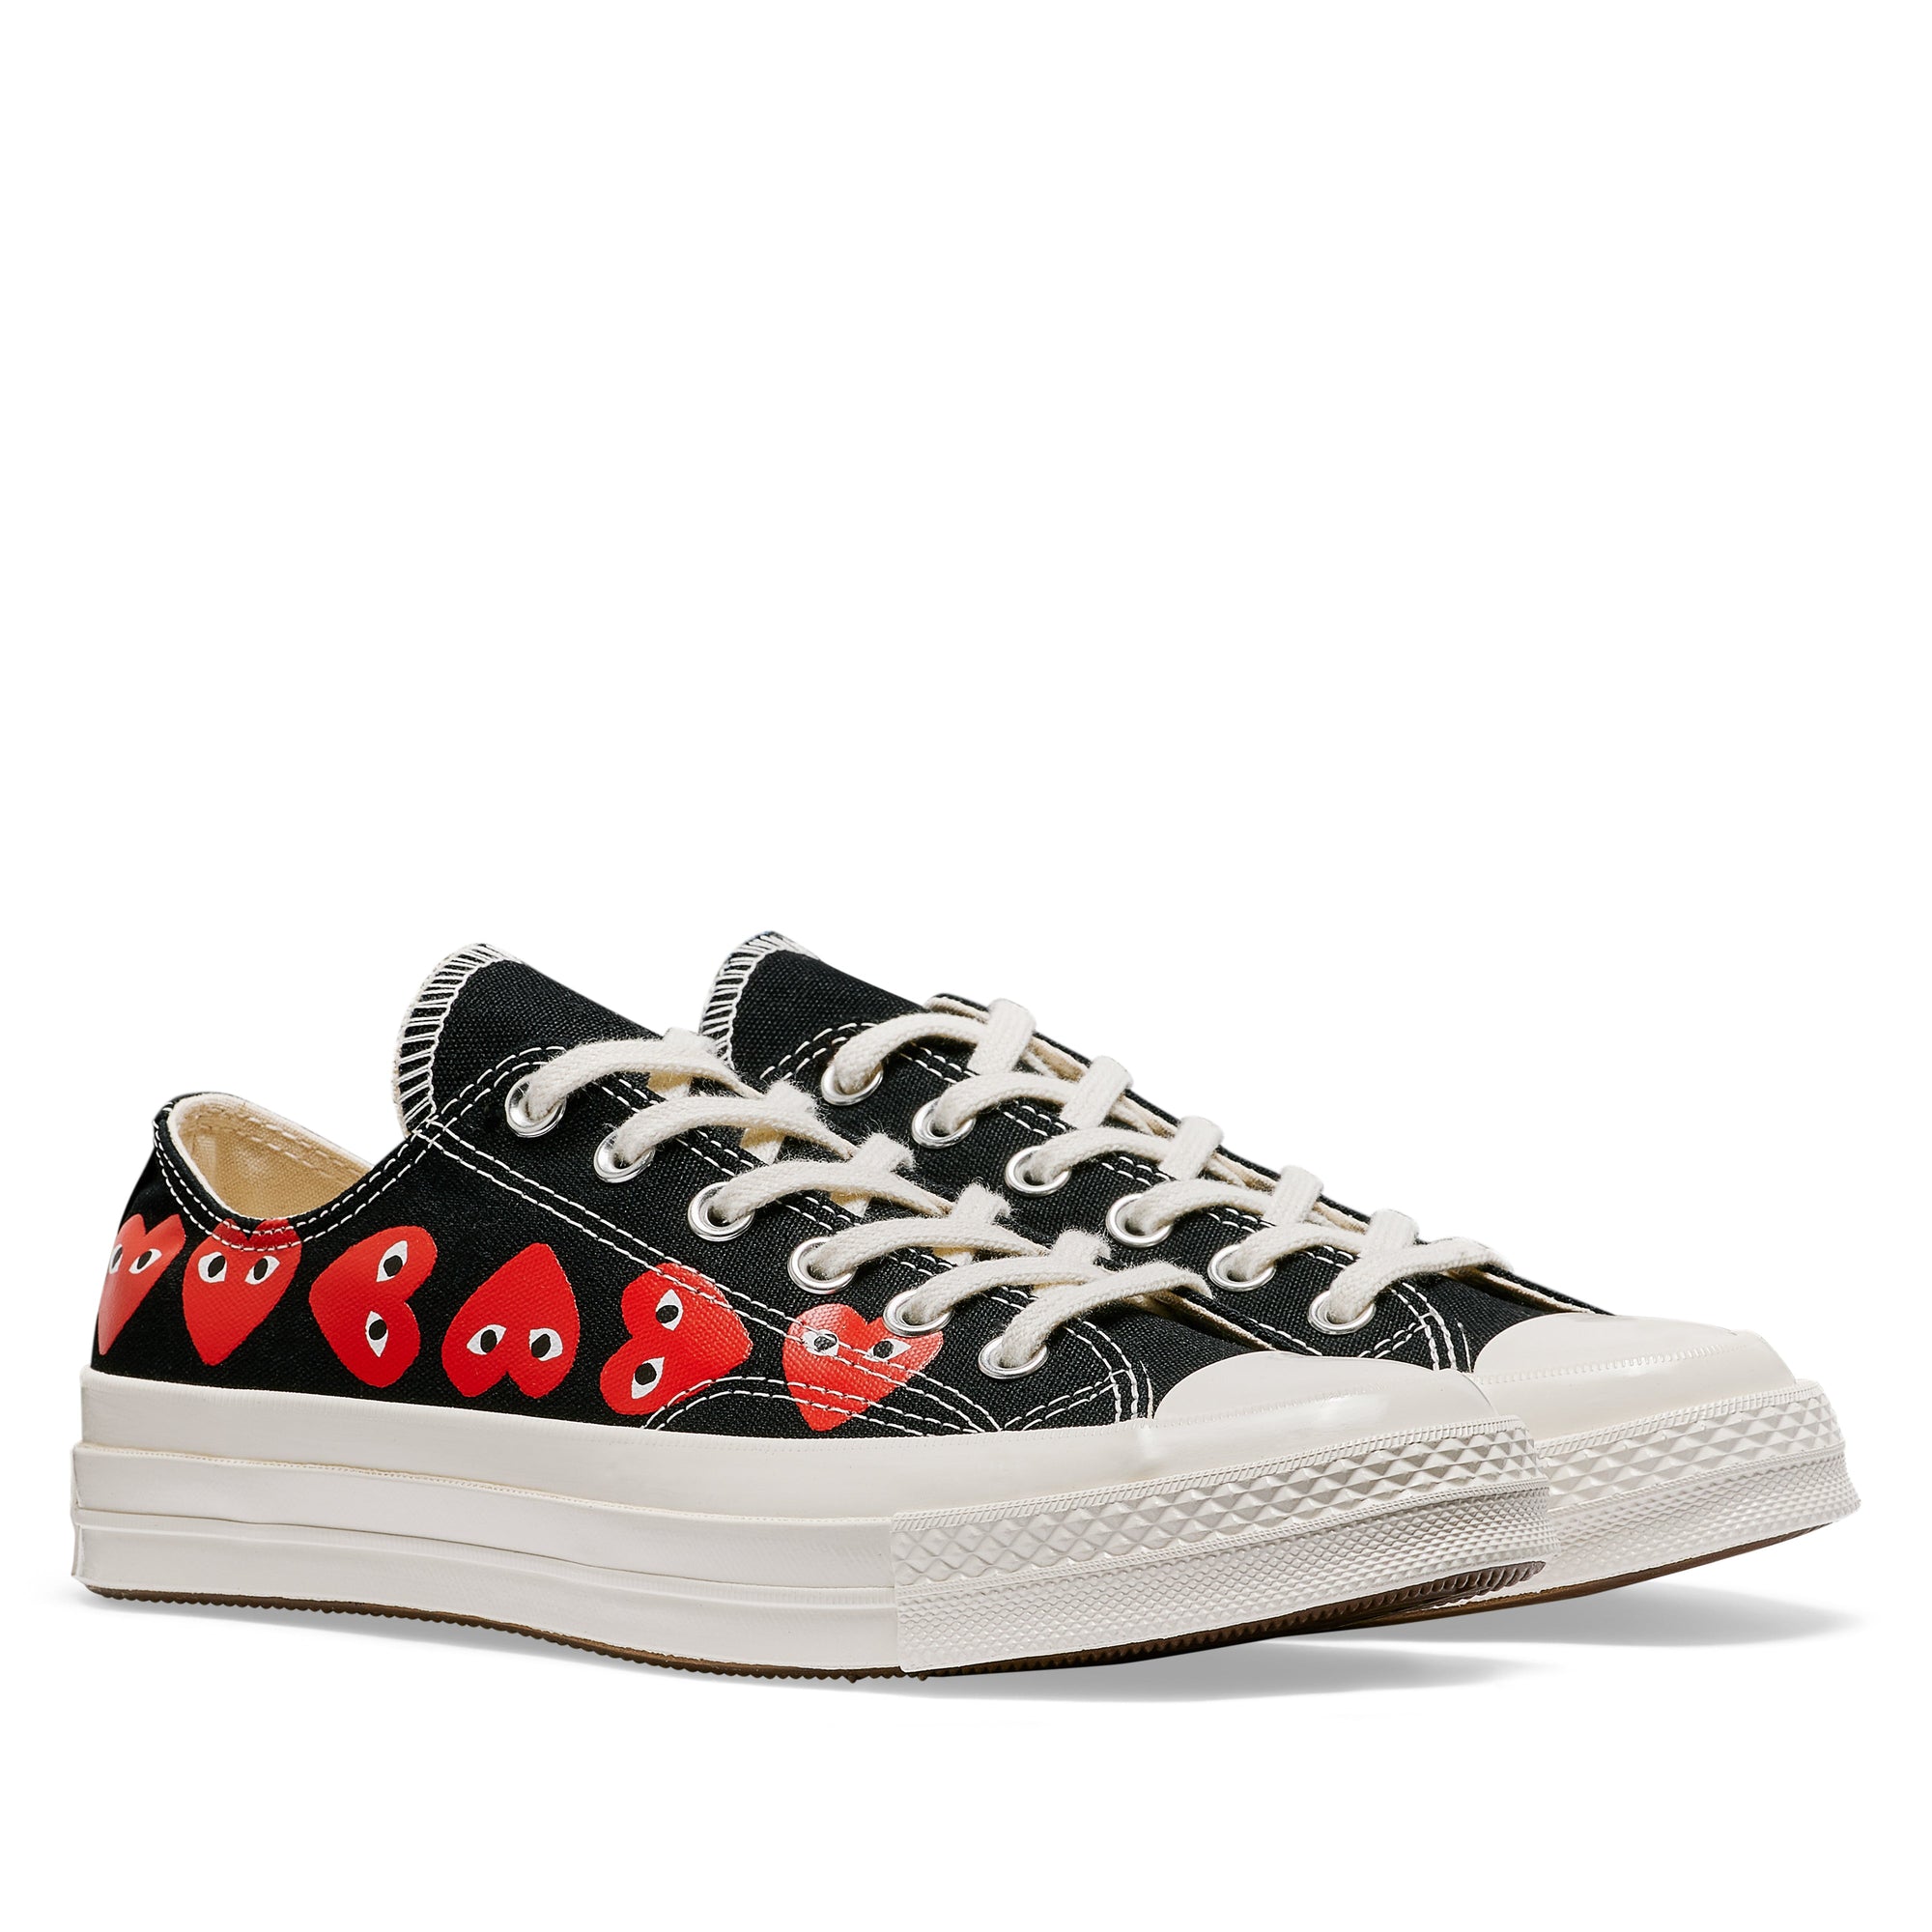 Play Converse - Multi Red Heart Chuck Taylor All Star '70 Low Sneakers - (Black) view 3